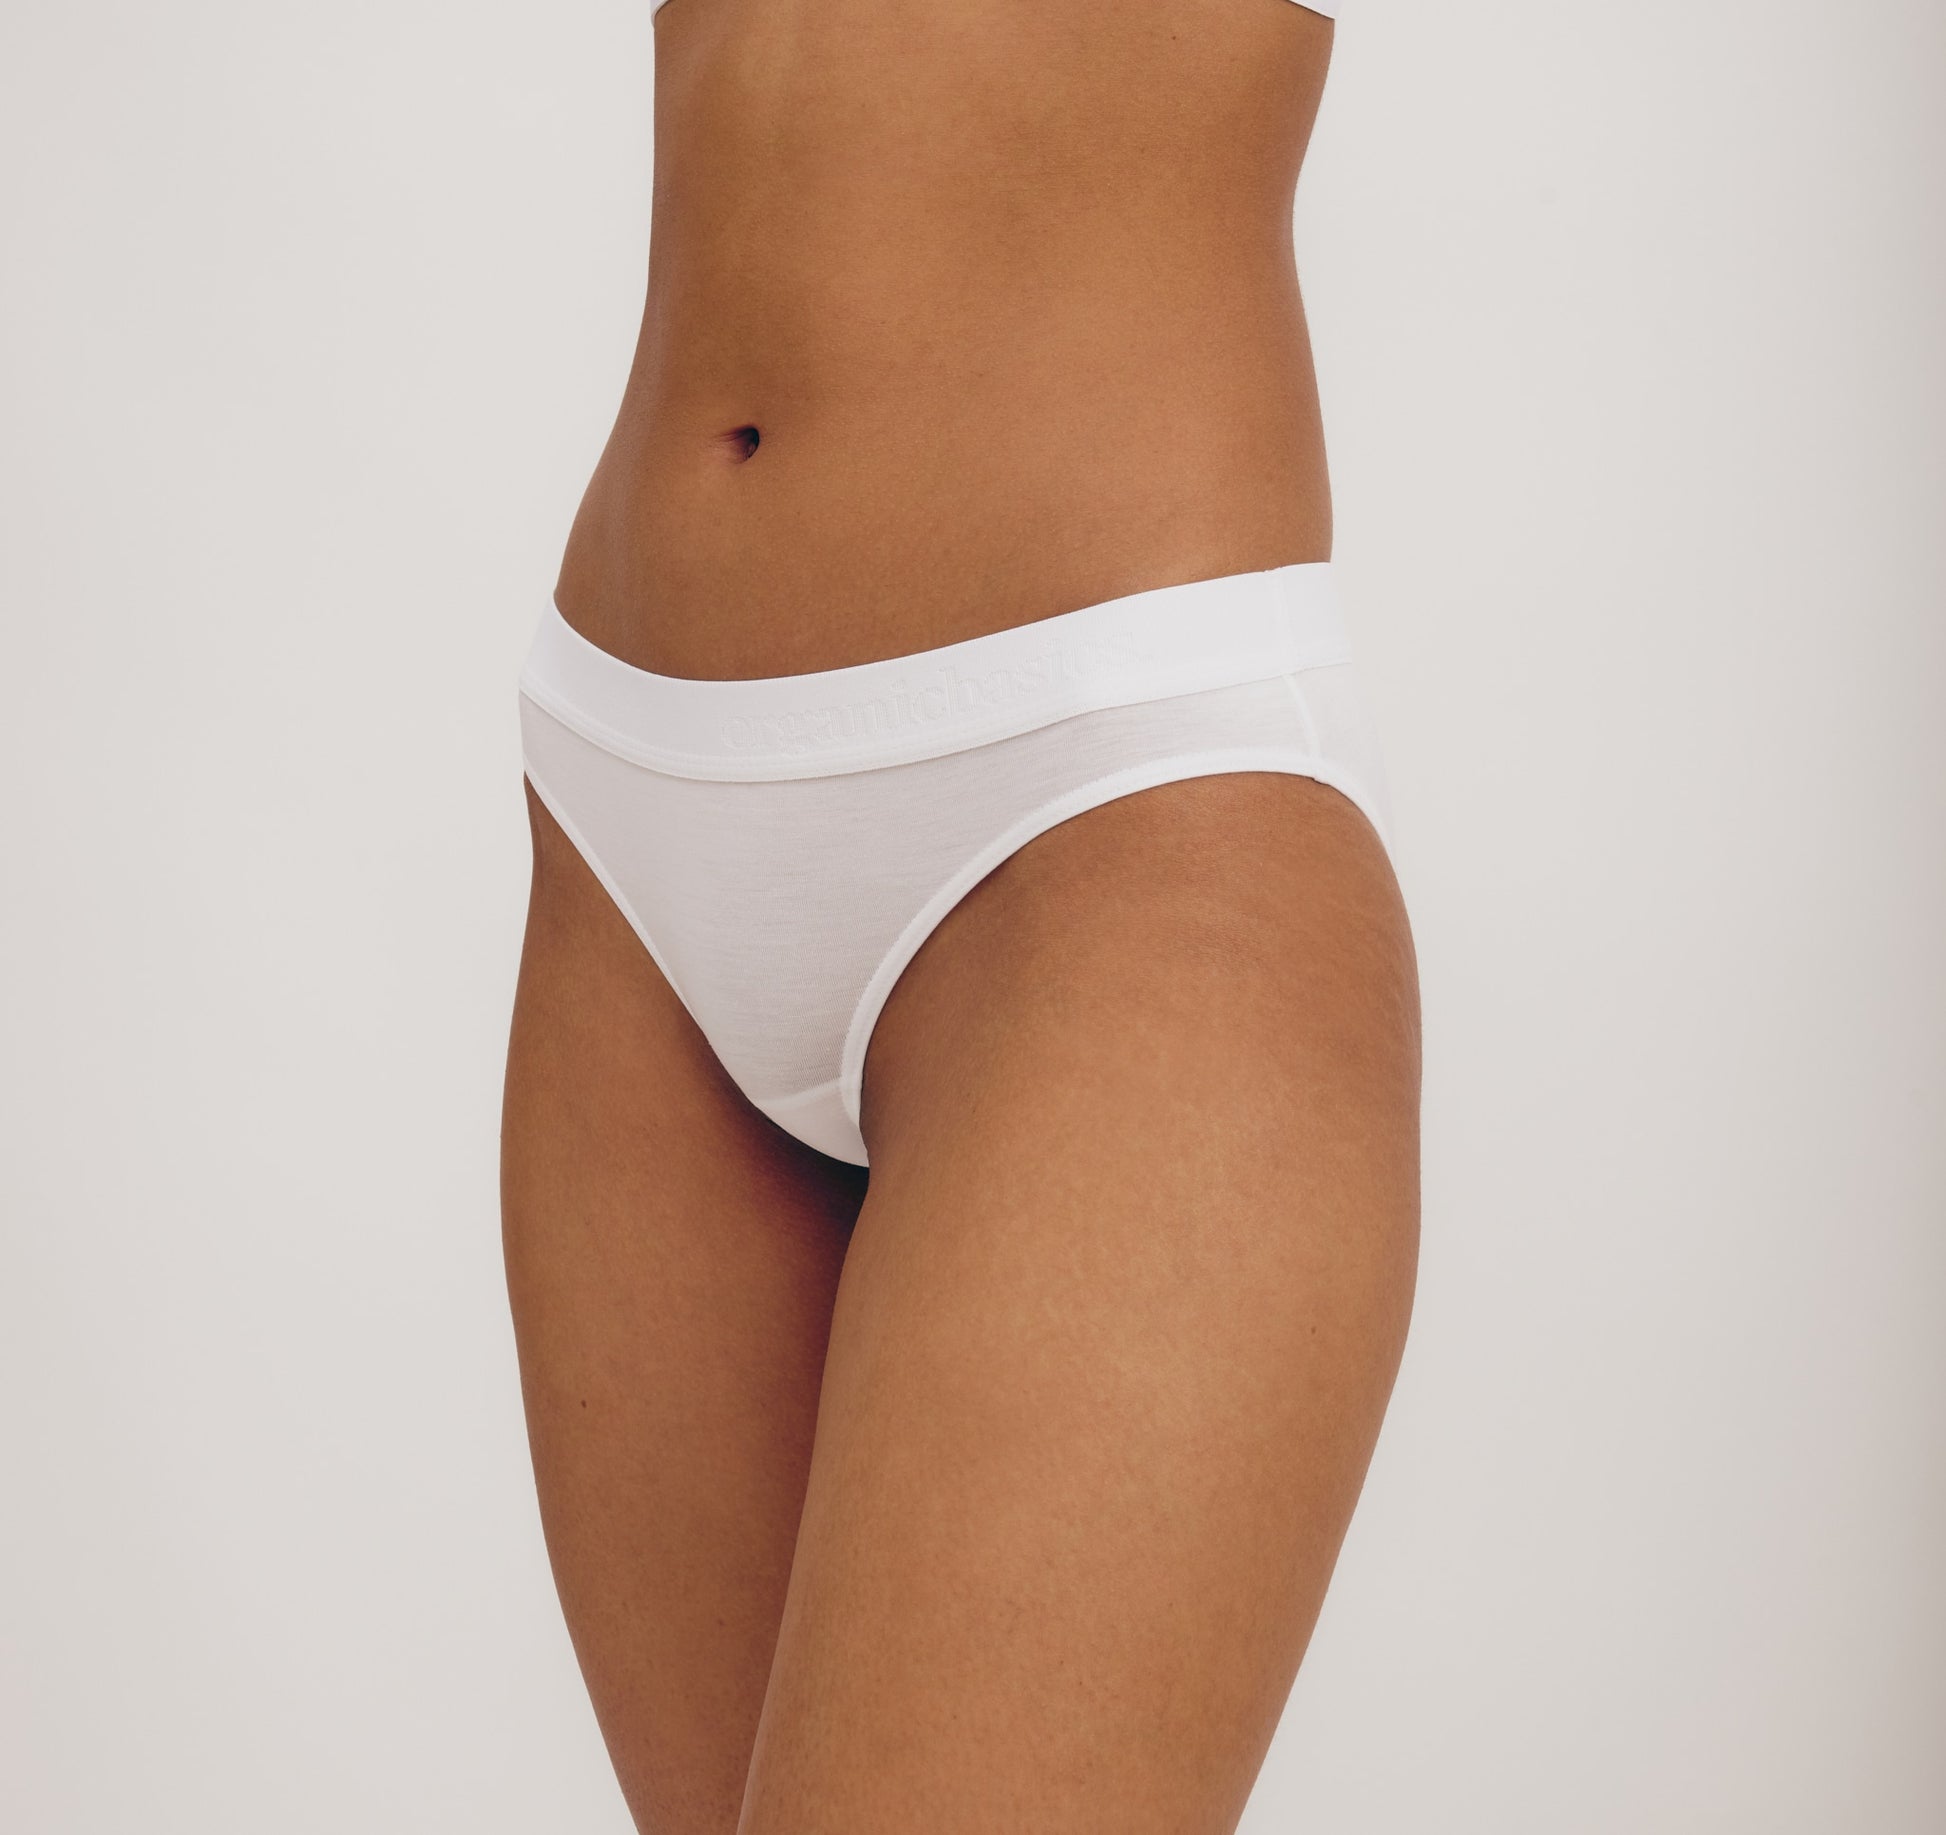 Comfort & softness in this organic underwear with sustainable commitment